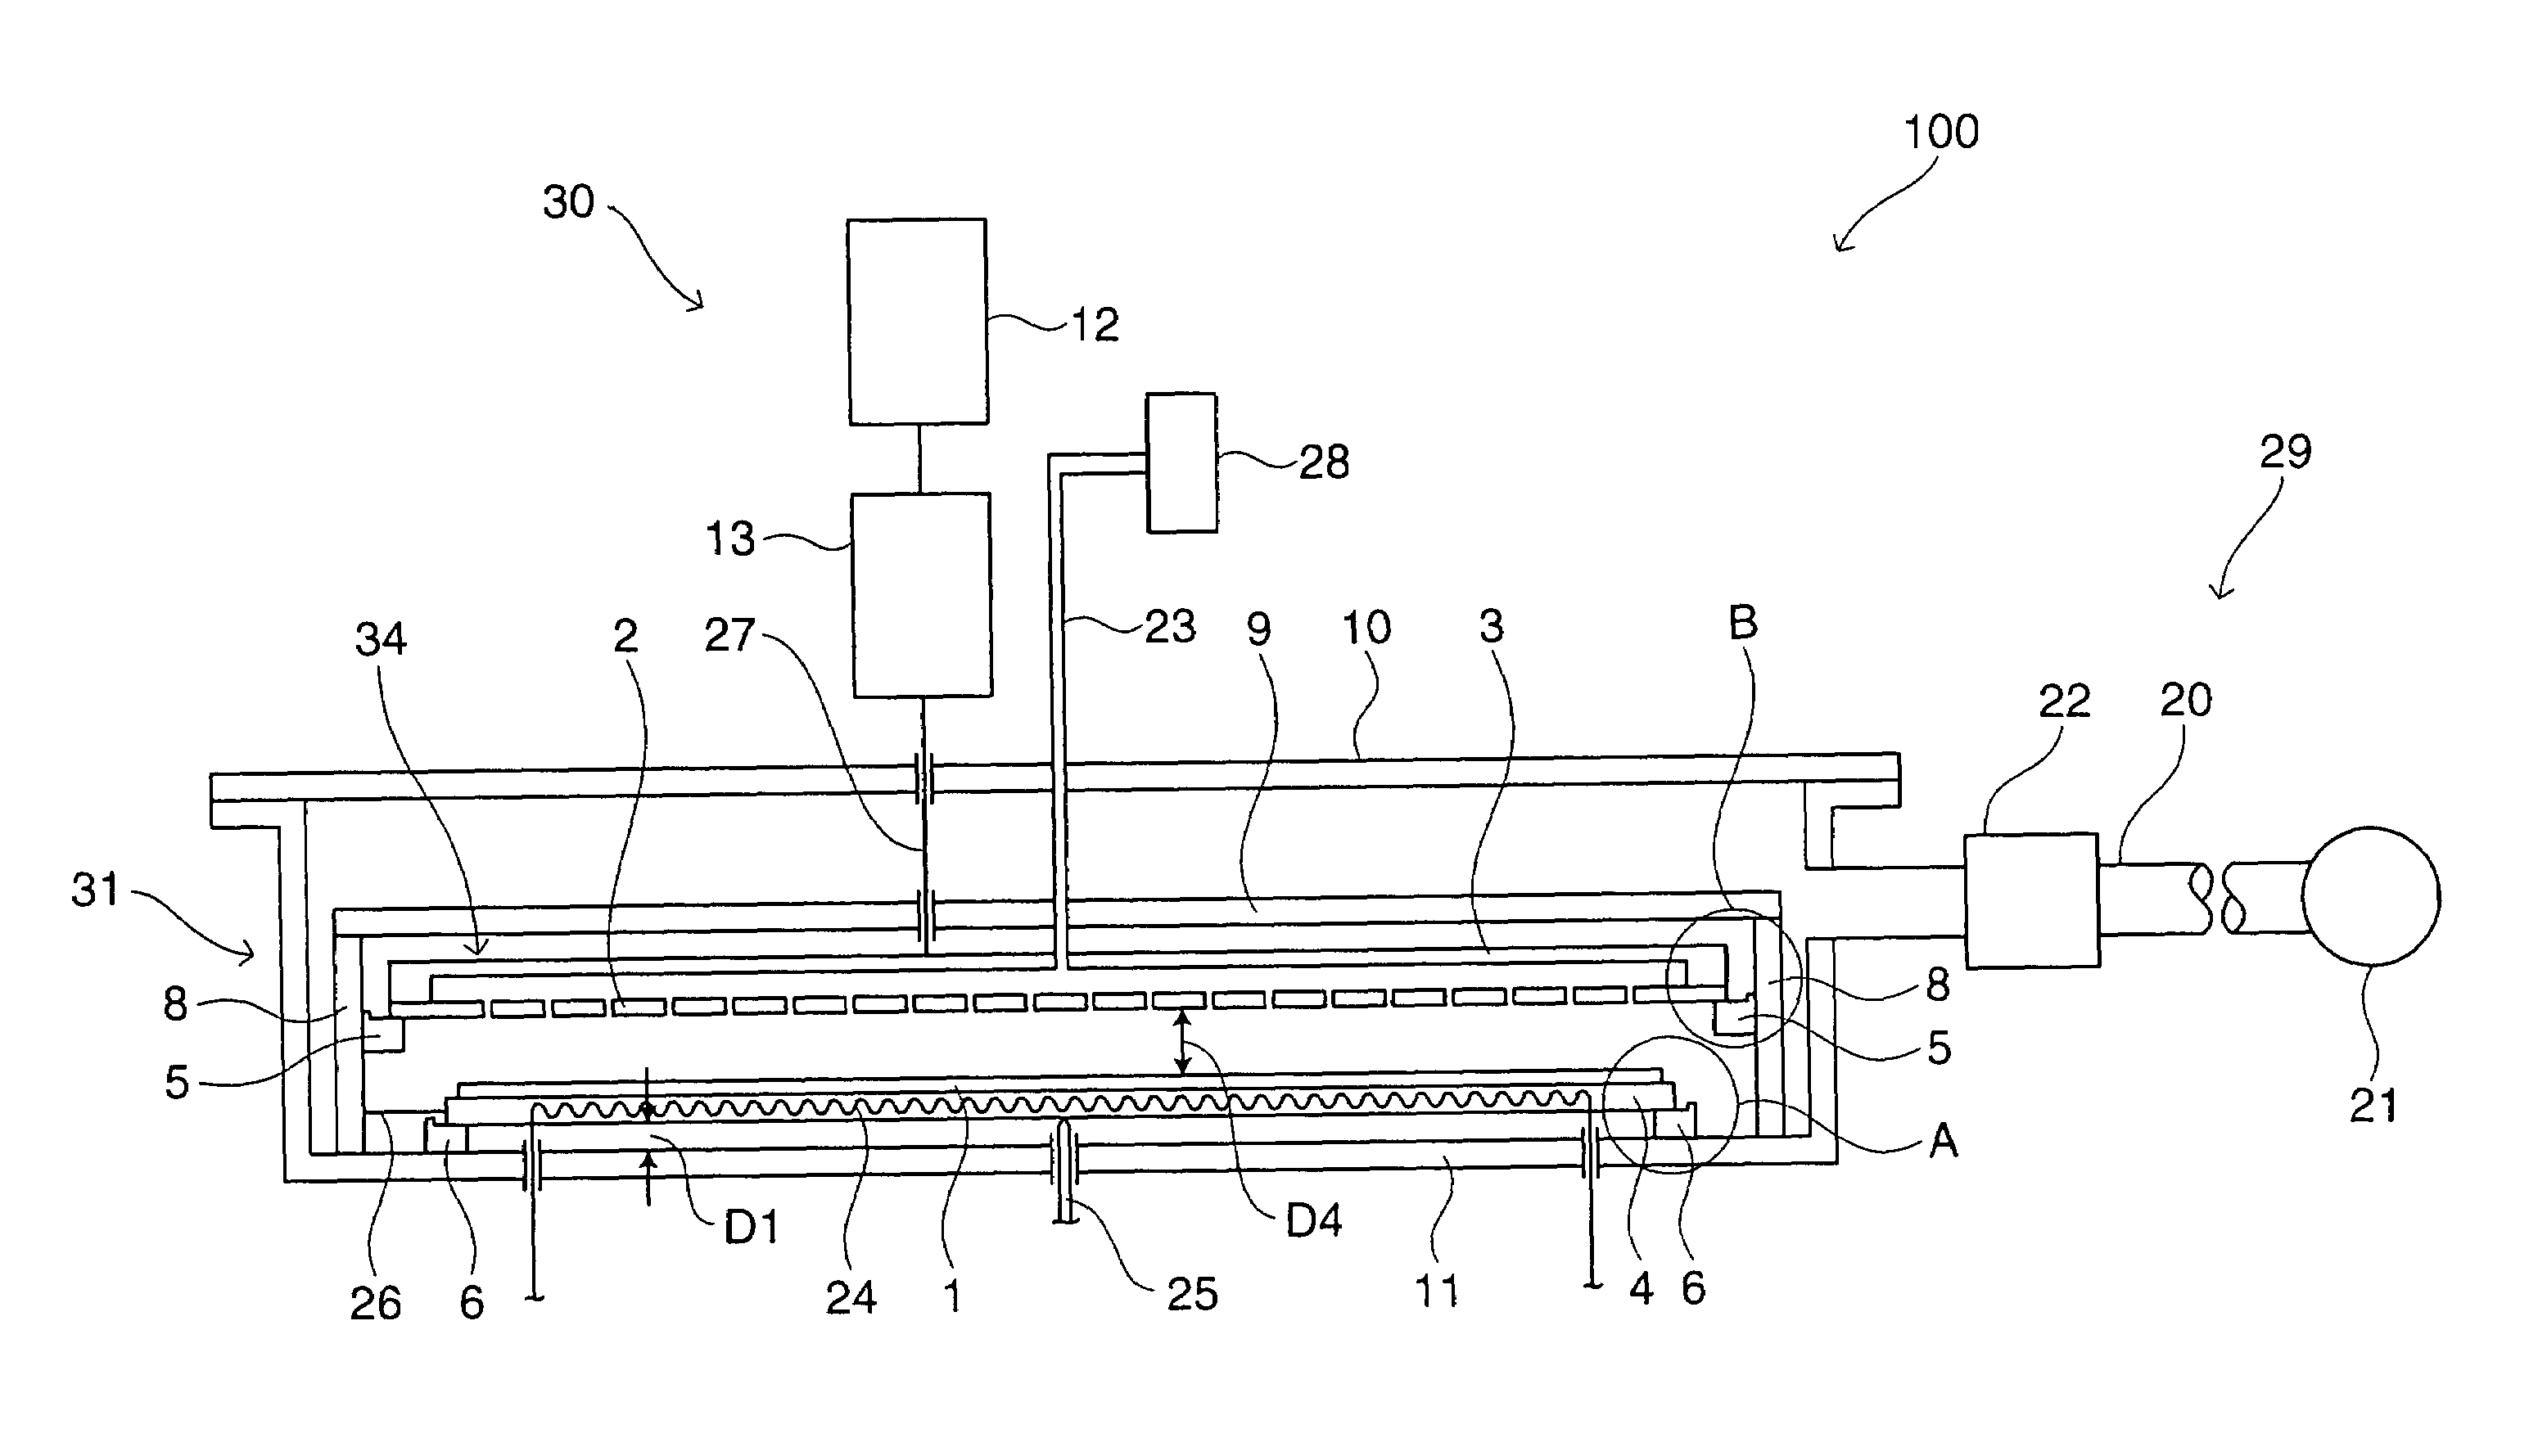 Thin film formation apparatus including engagement members for support during thermal expansion